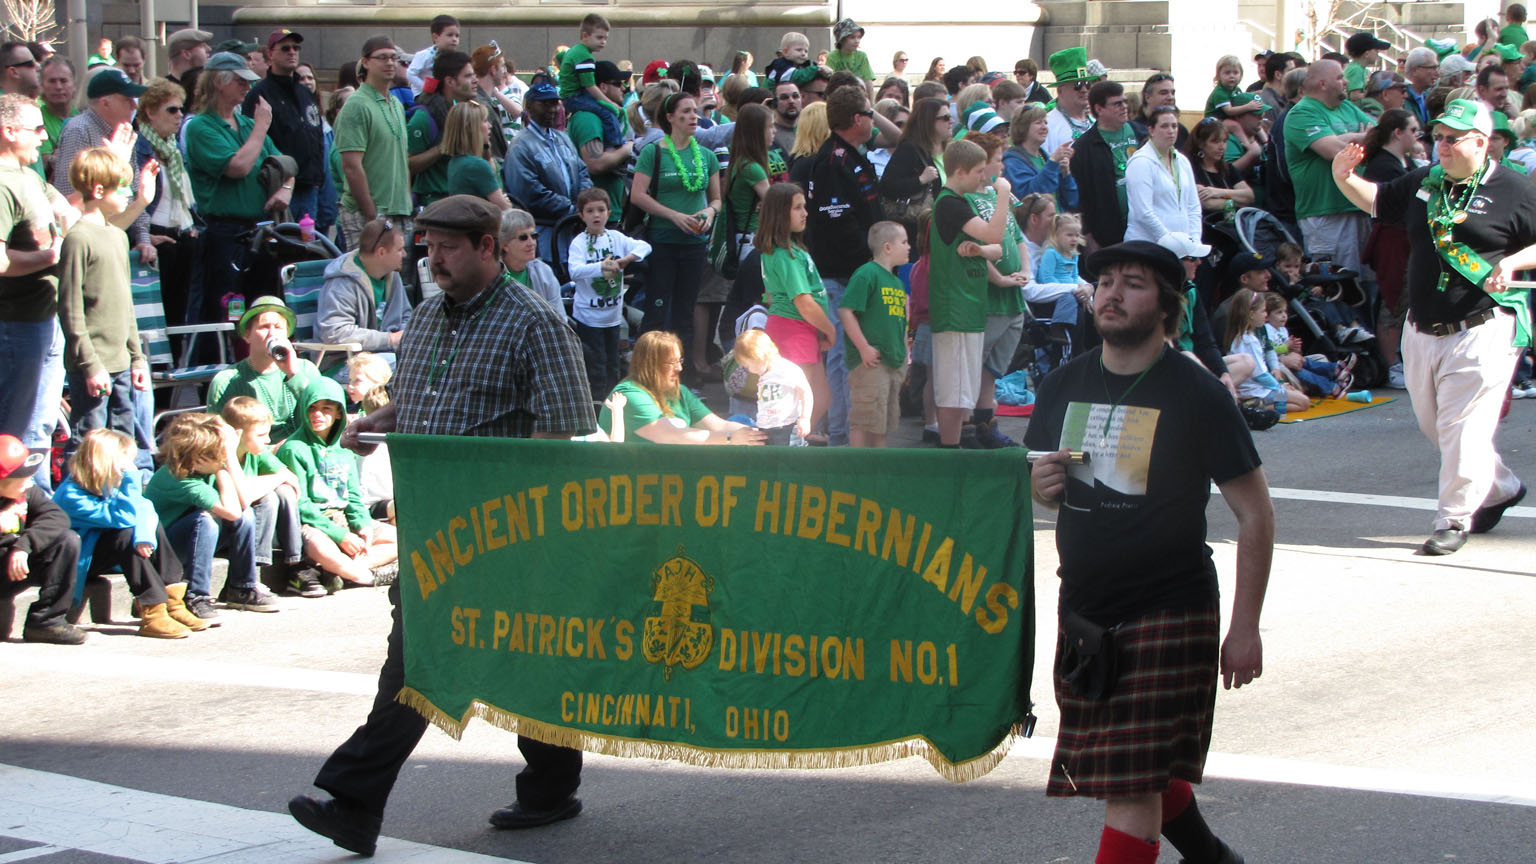 ... St. Patrick: Another Moment in Archives Month and the Cincinnati Irish